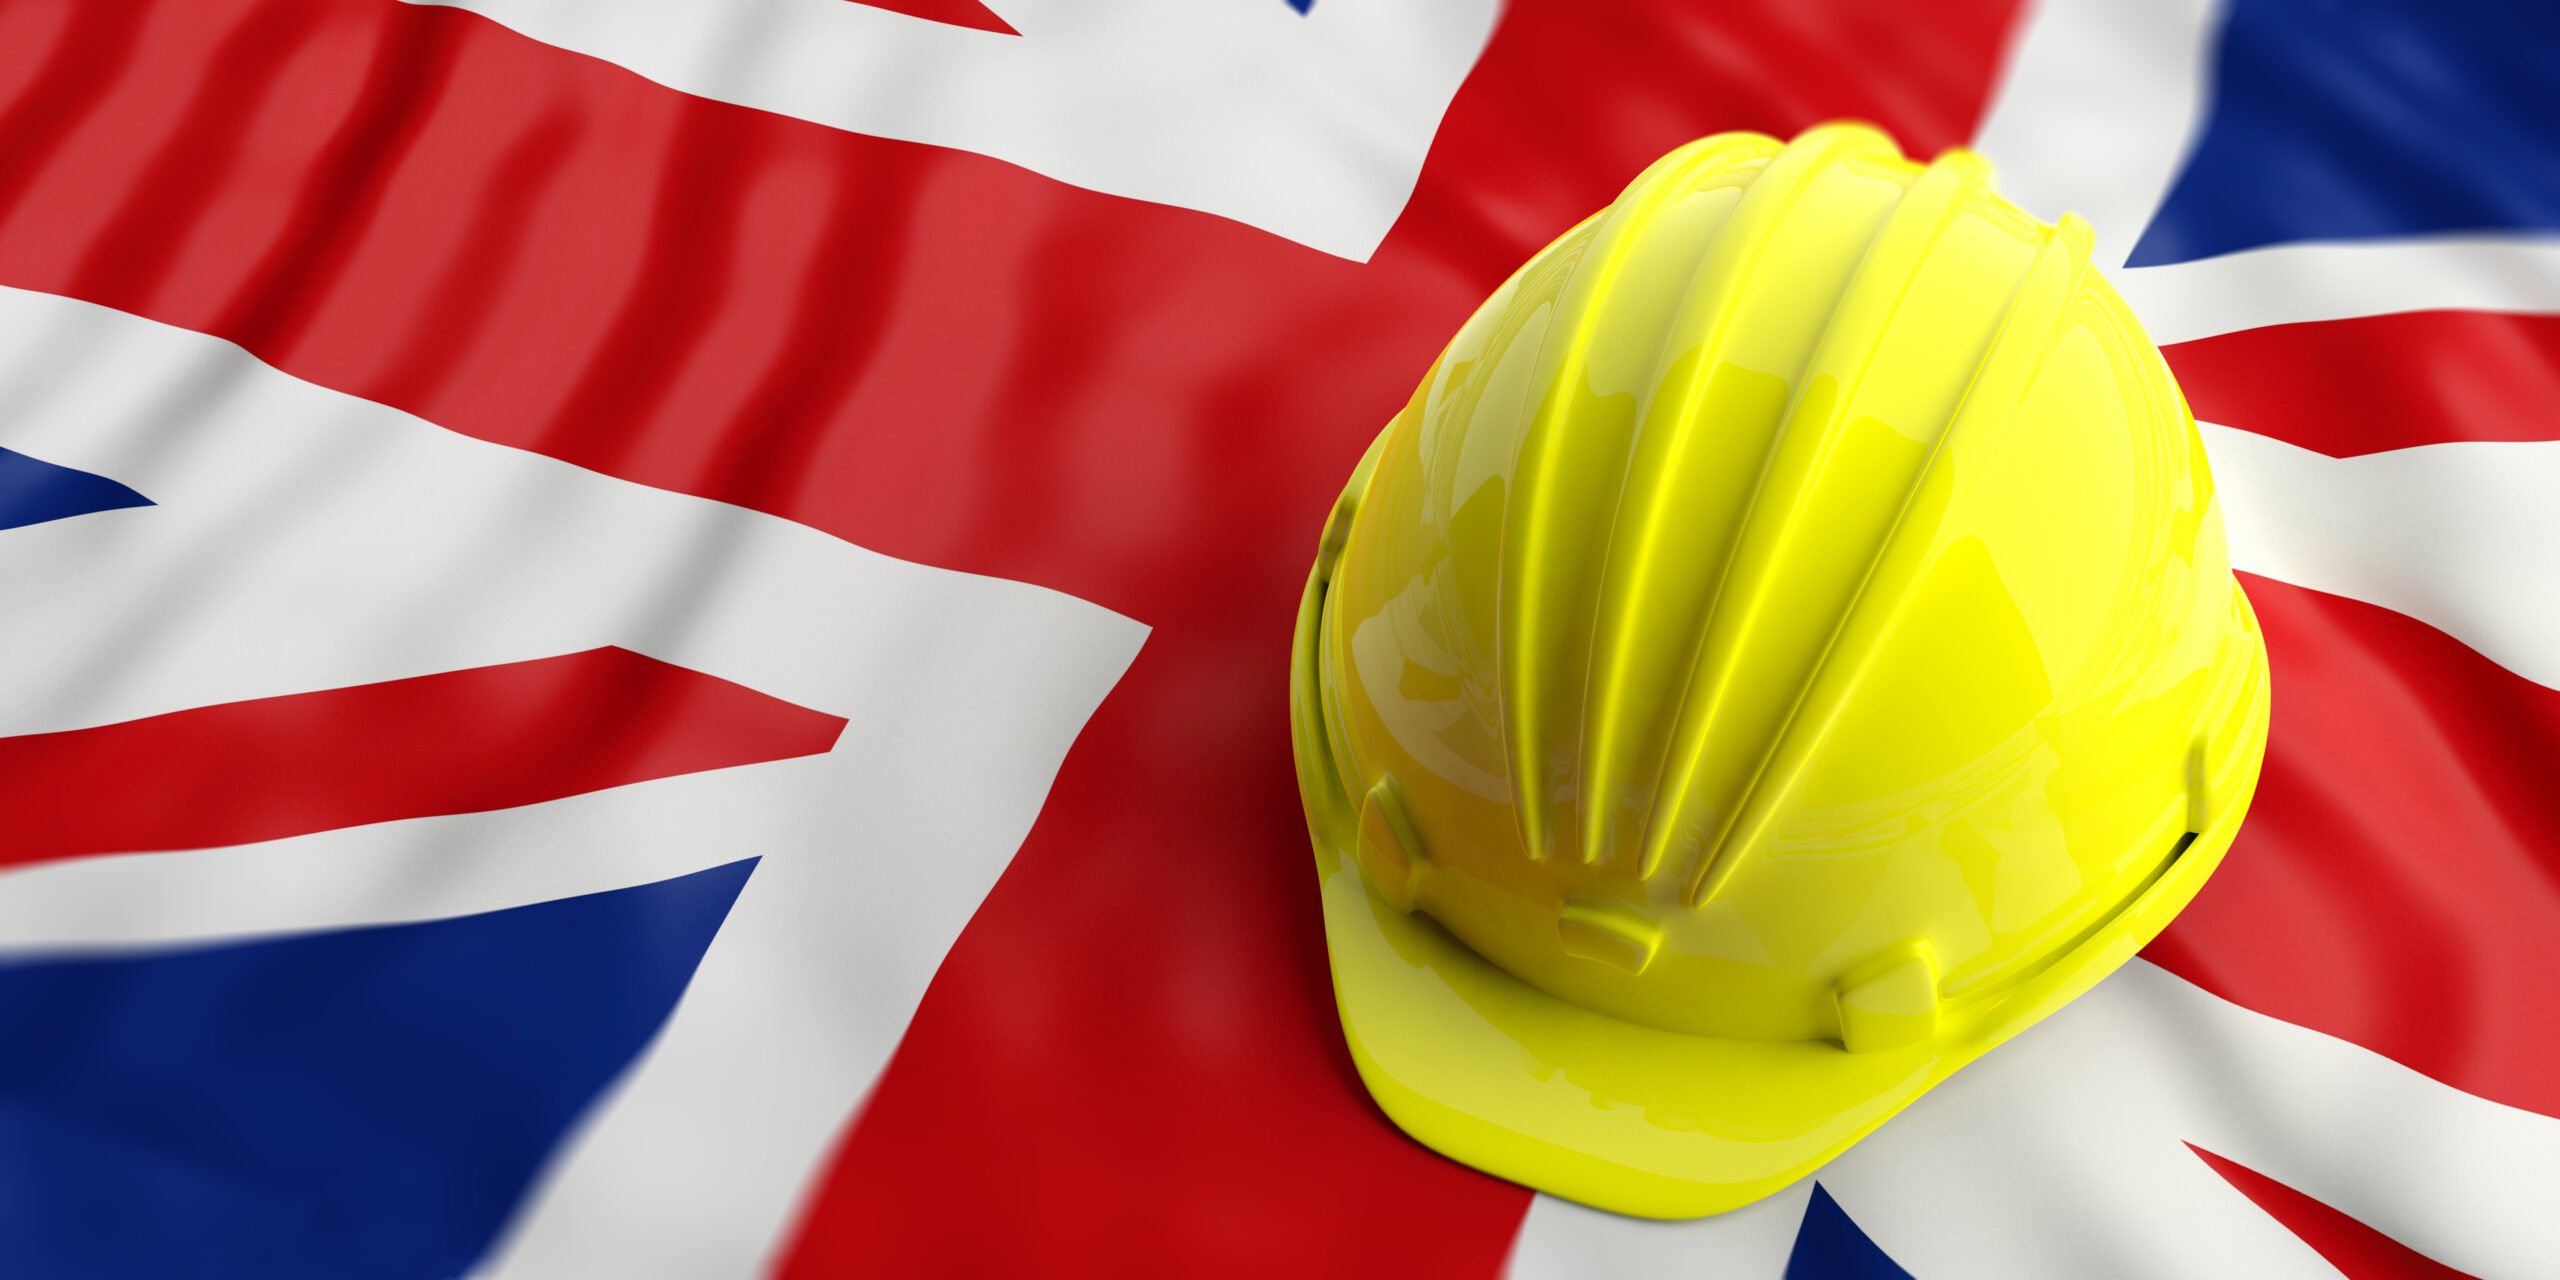 Yellow construction hat over UK flag hero image is PPE is for Life not just covid: The necessary role of personal protective equipment.